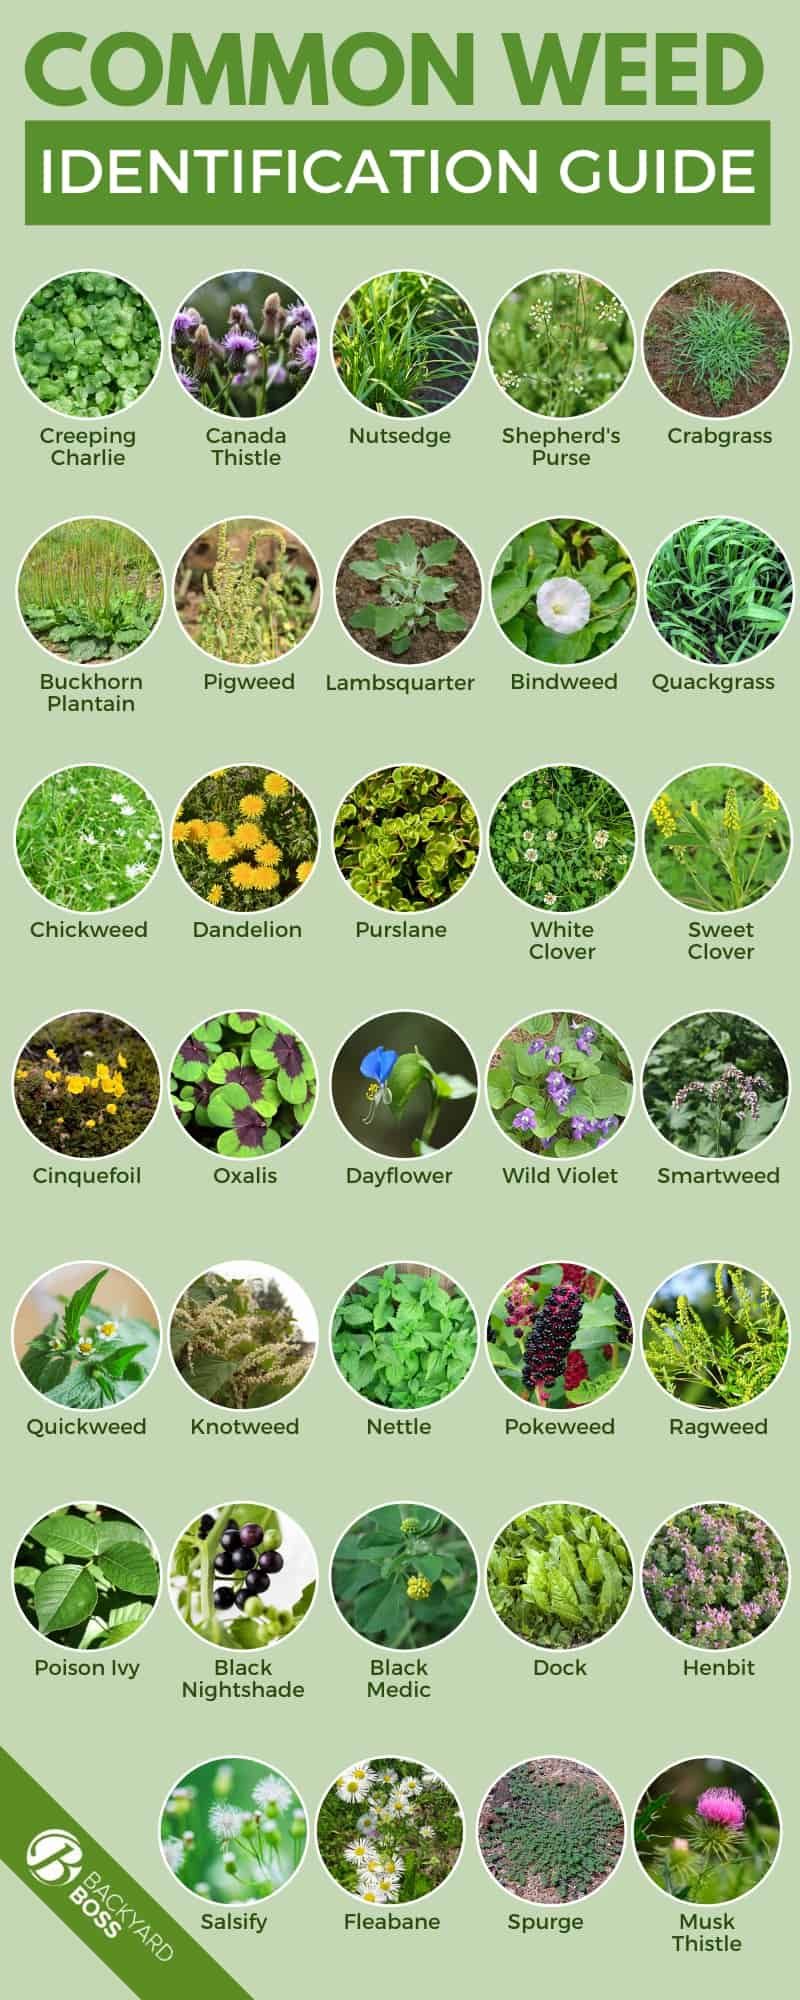 Common Weed Identification Guide - infographic